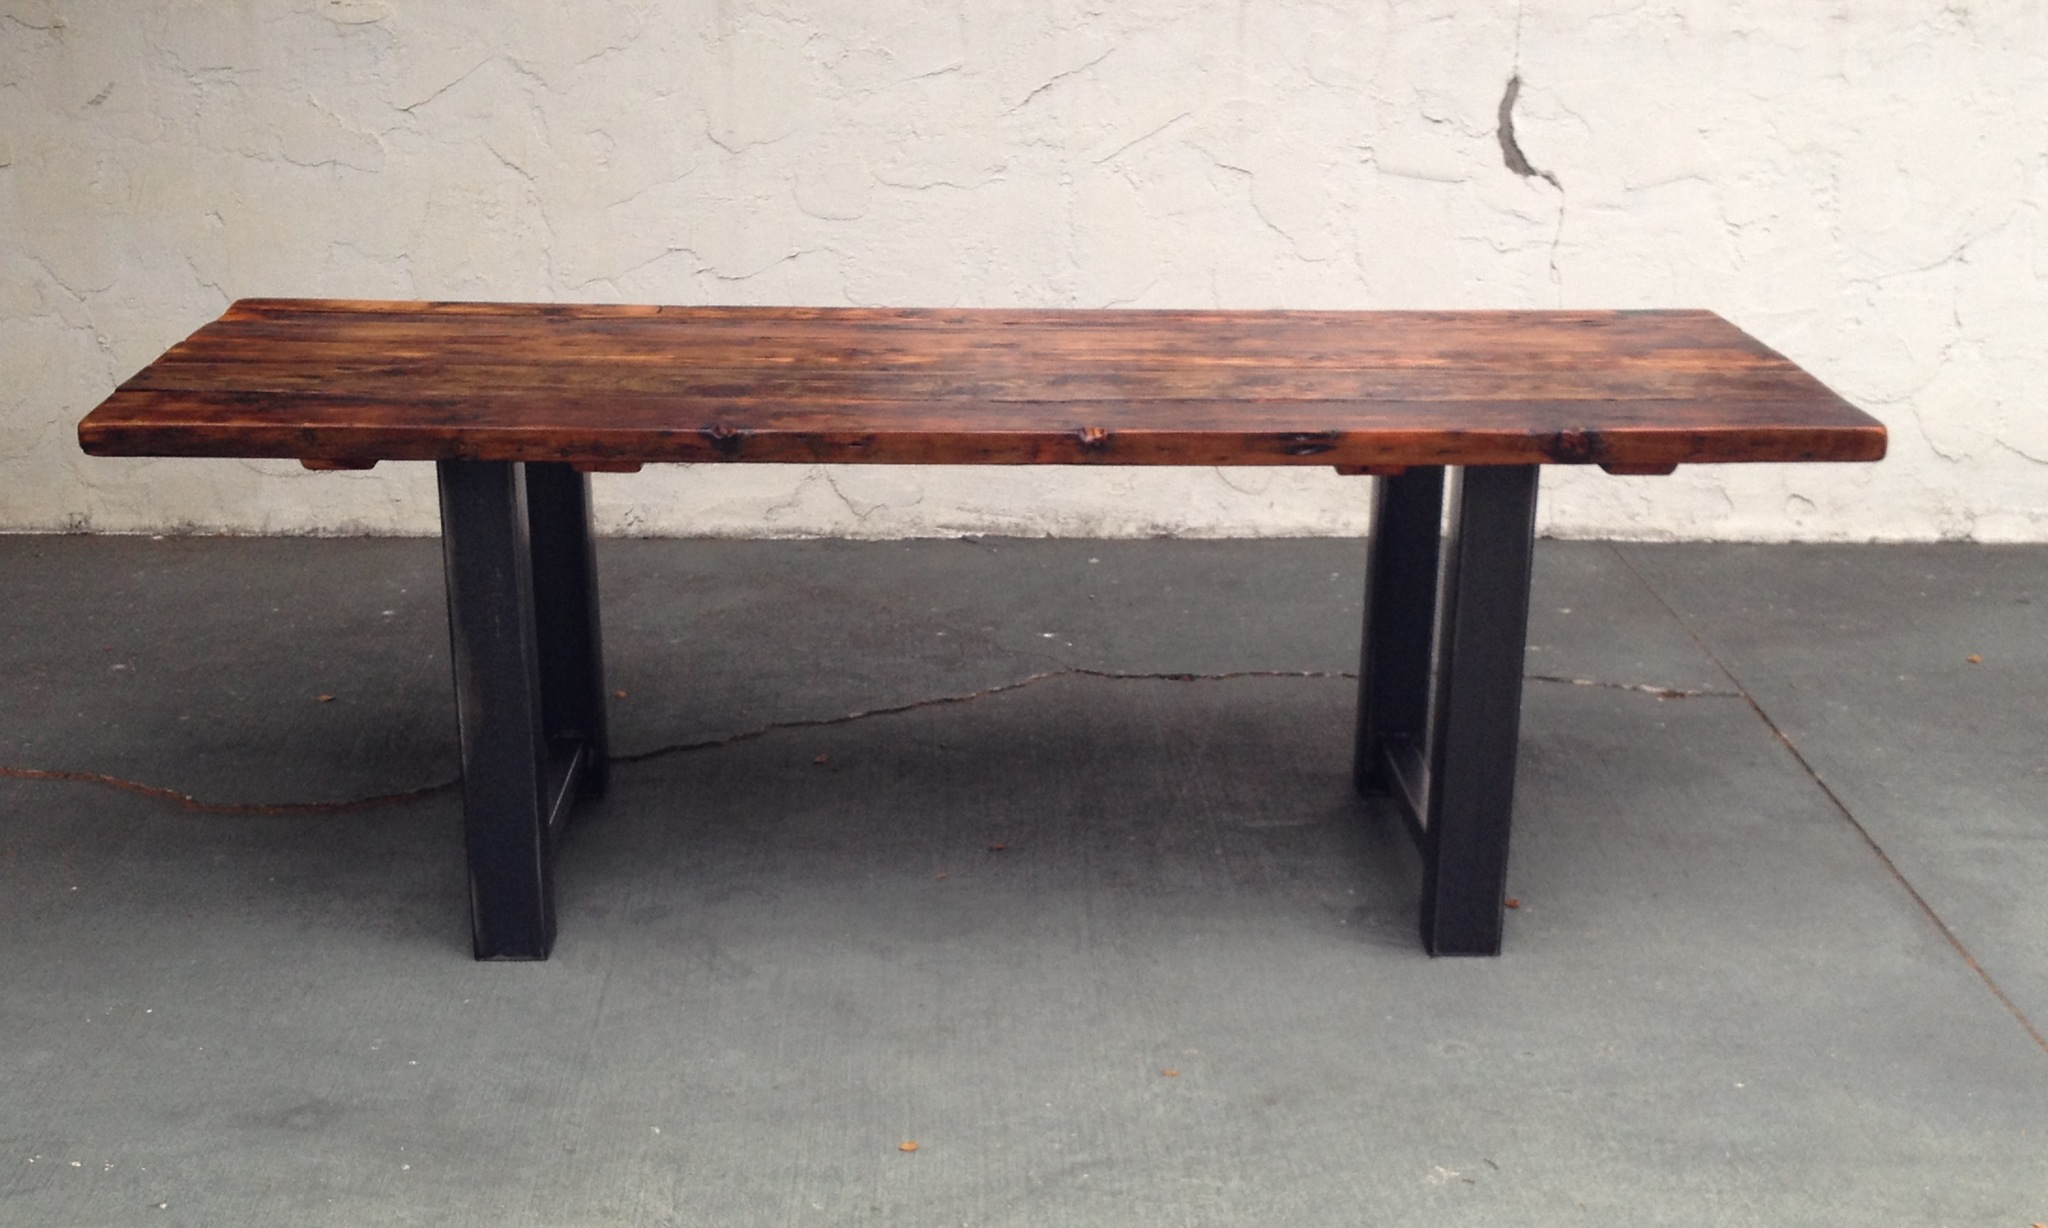  .com/2013/07/reclaimed-wood-and-metal-dining-table-12.jpg